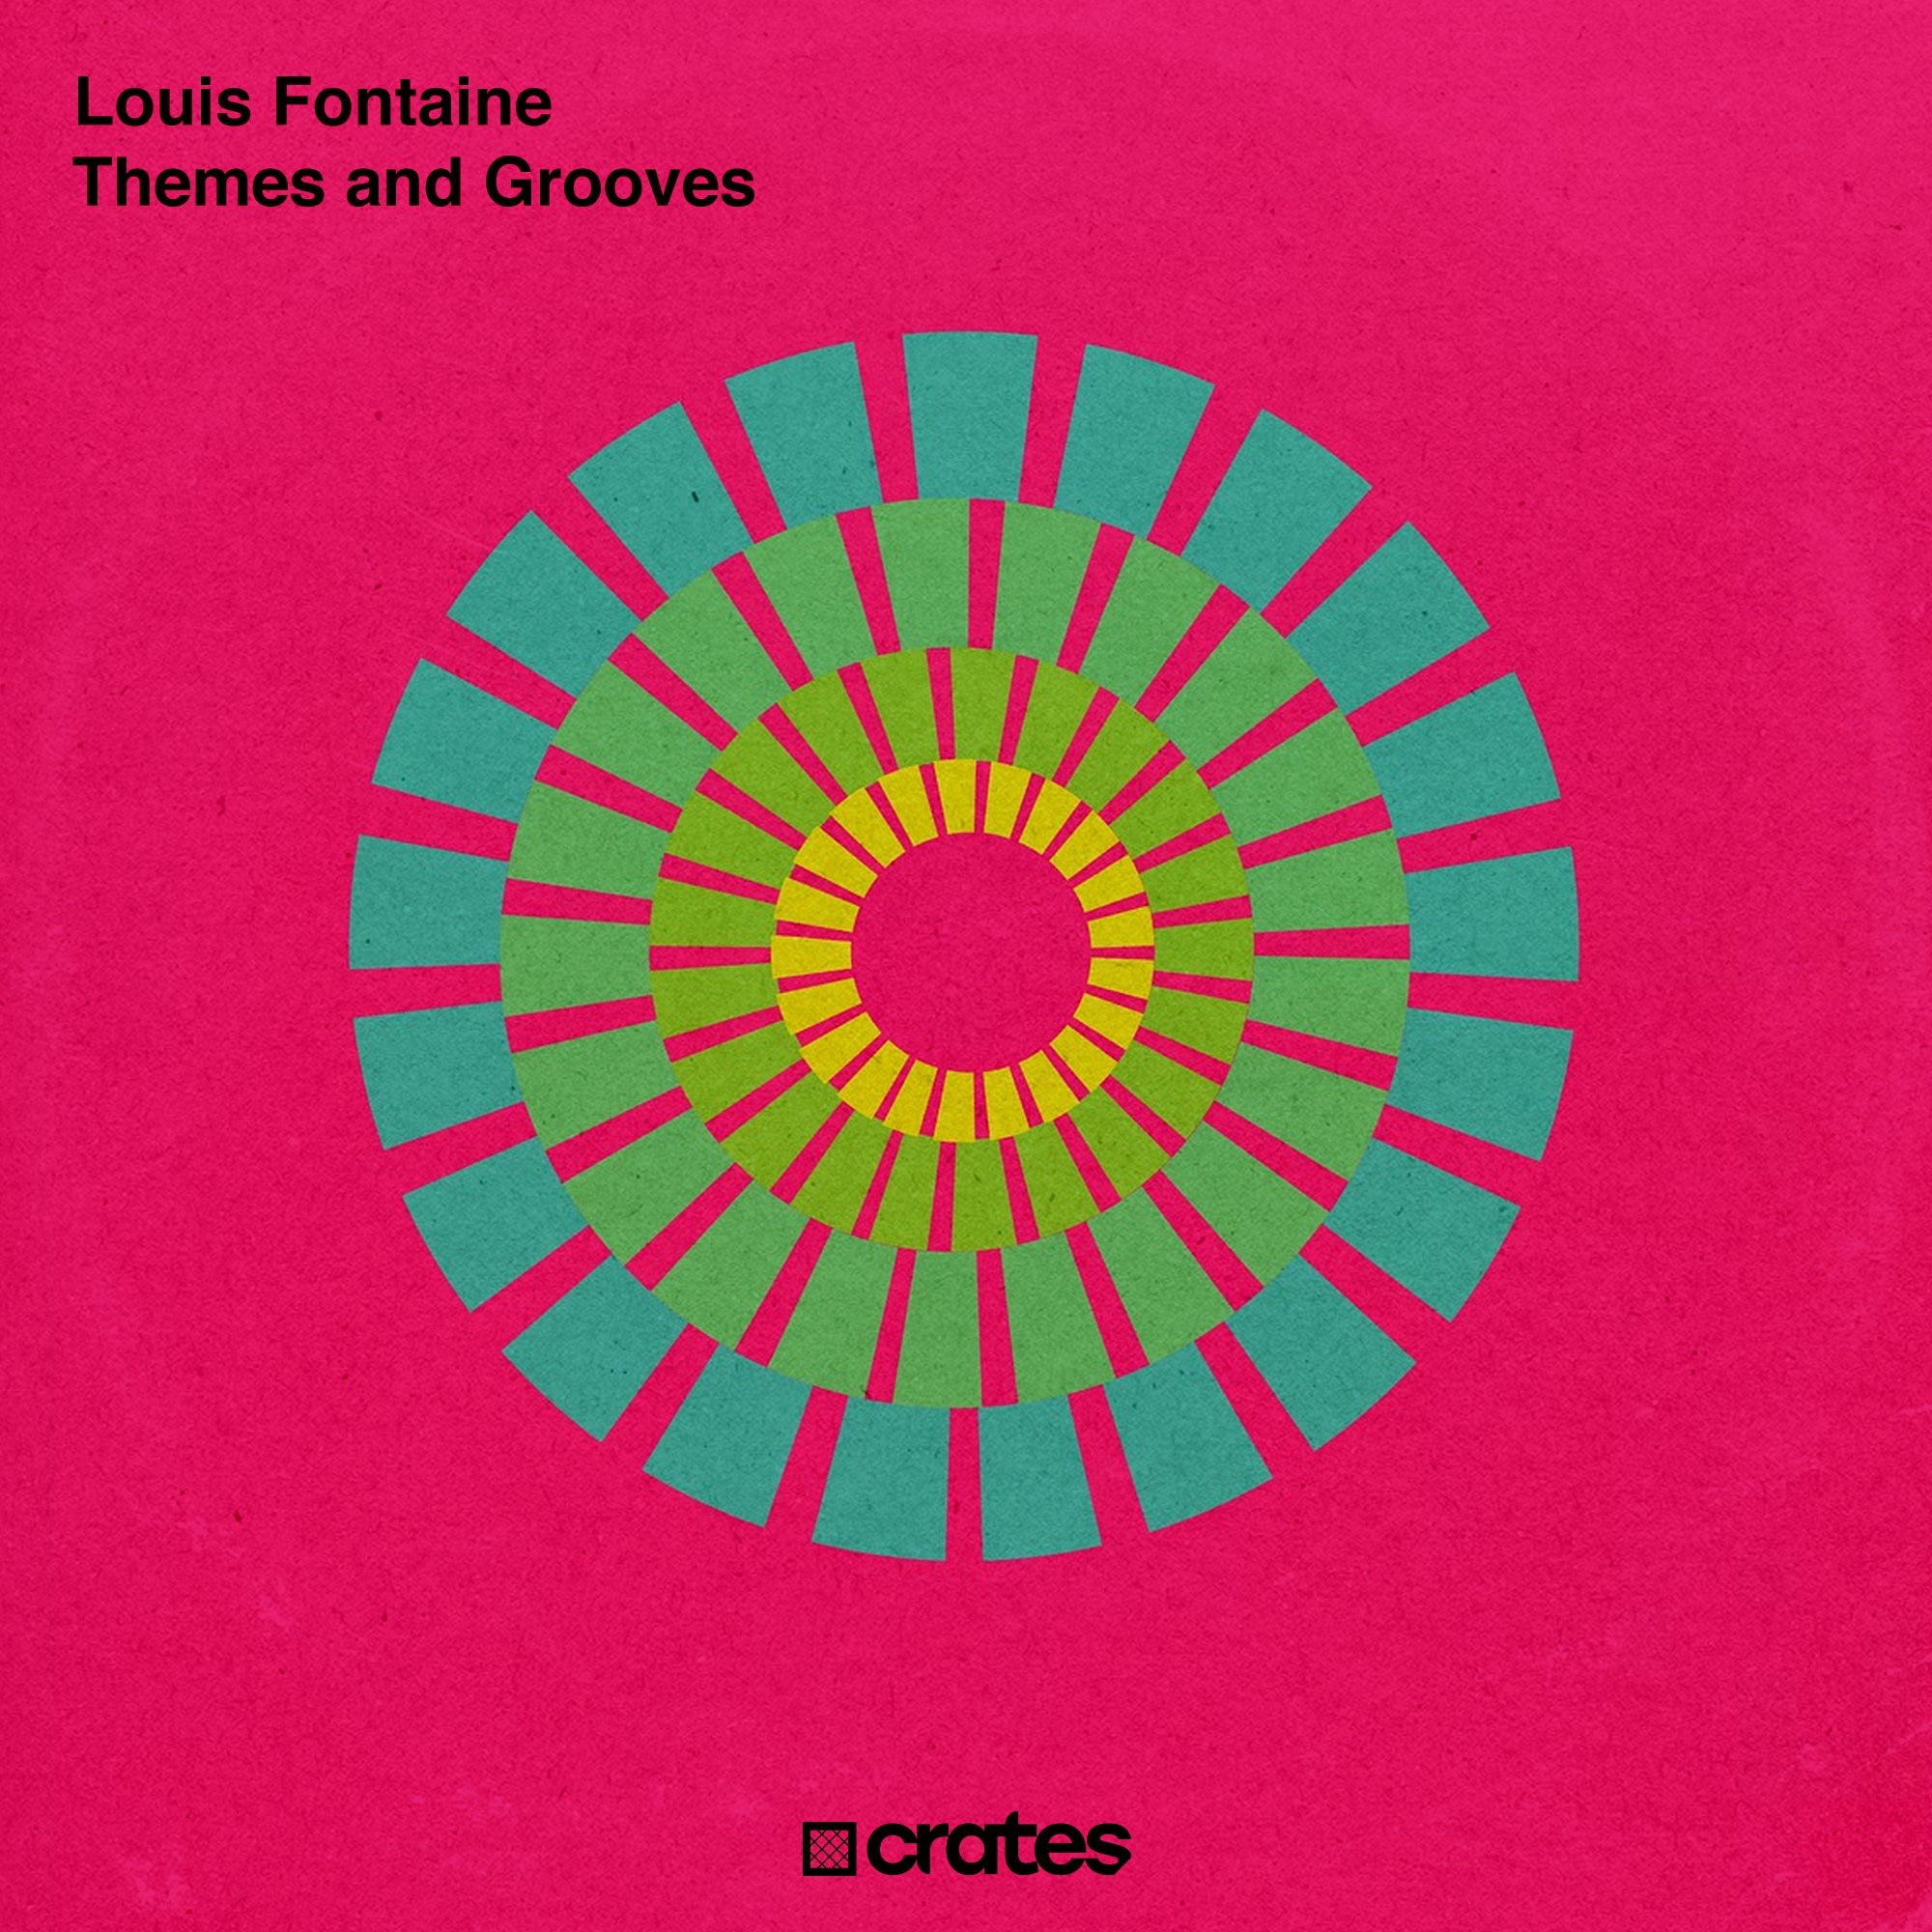 http://crates.whosampled.com/cdn/shop/files/LouisFontaine_Themes_Grooves_COVER.jpg?v=1702663797